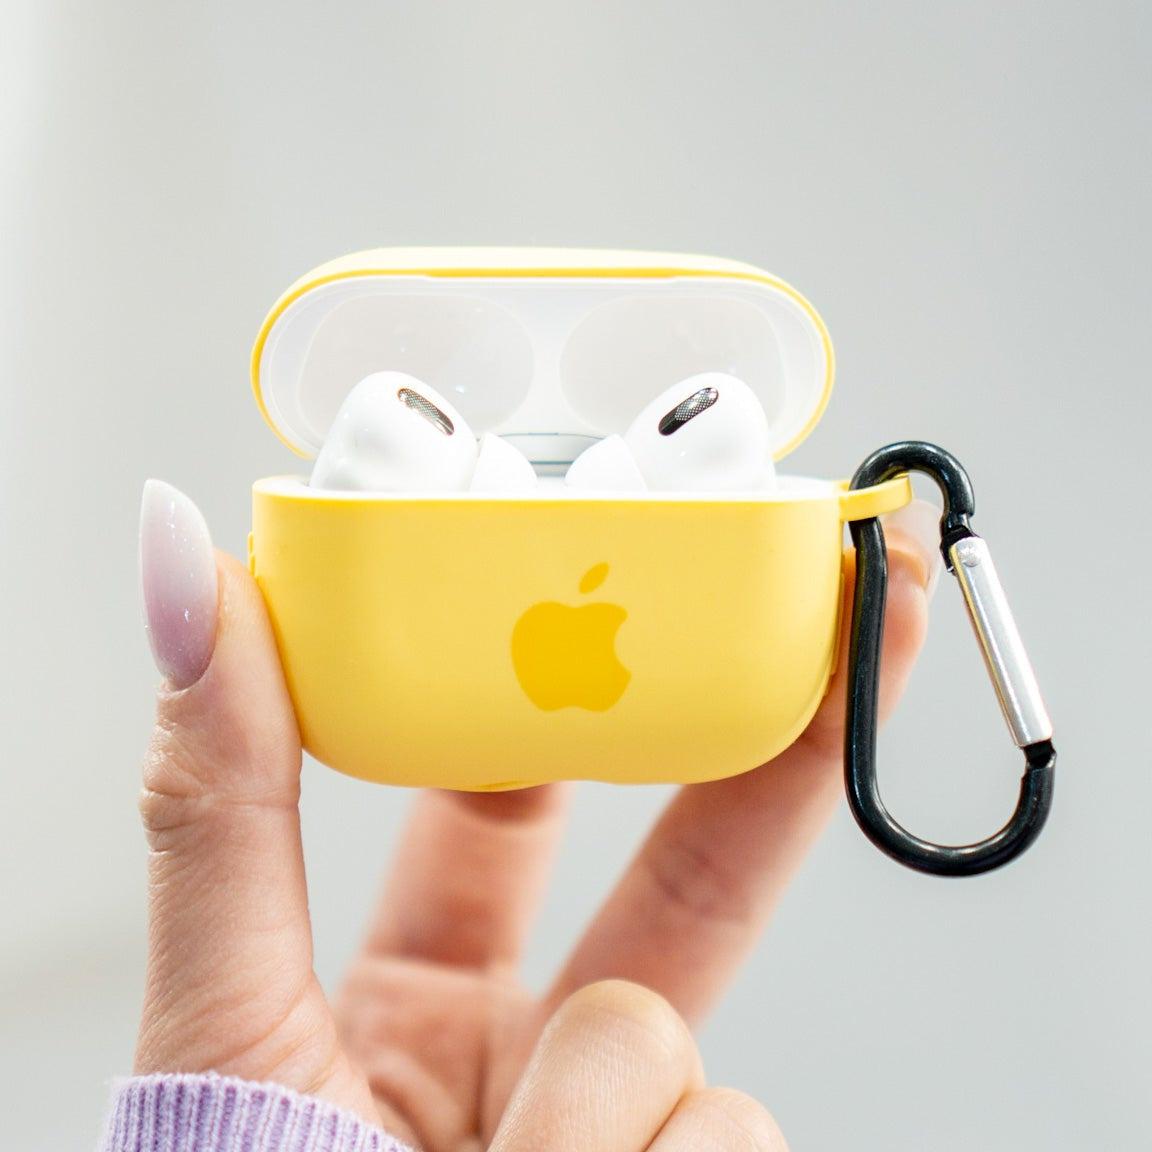 Husa AirPods Pro Silicone Case Canary Yellow Anca's Store 